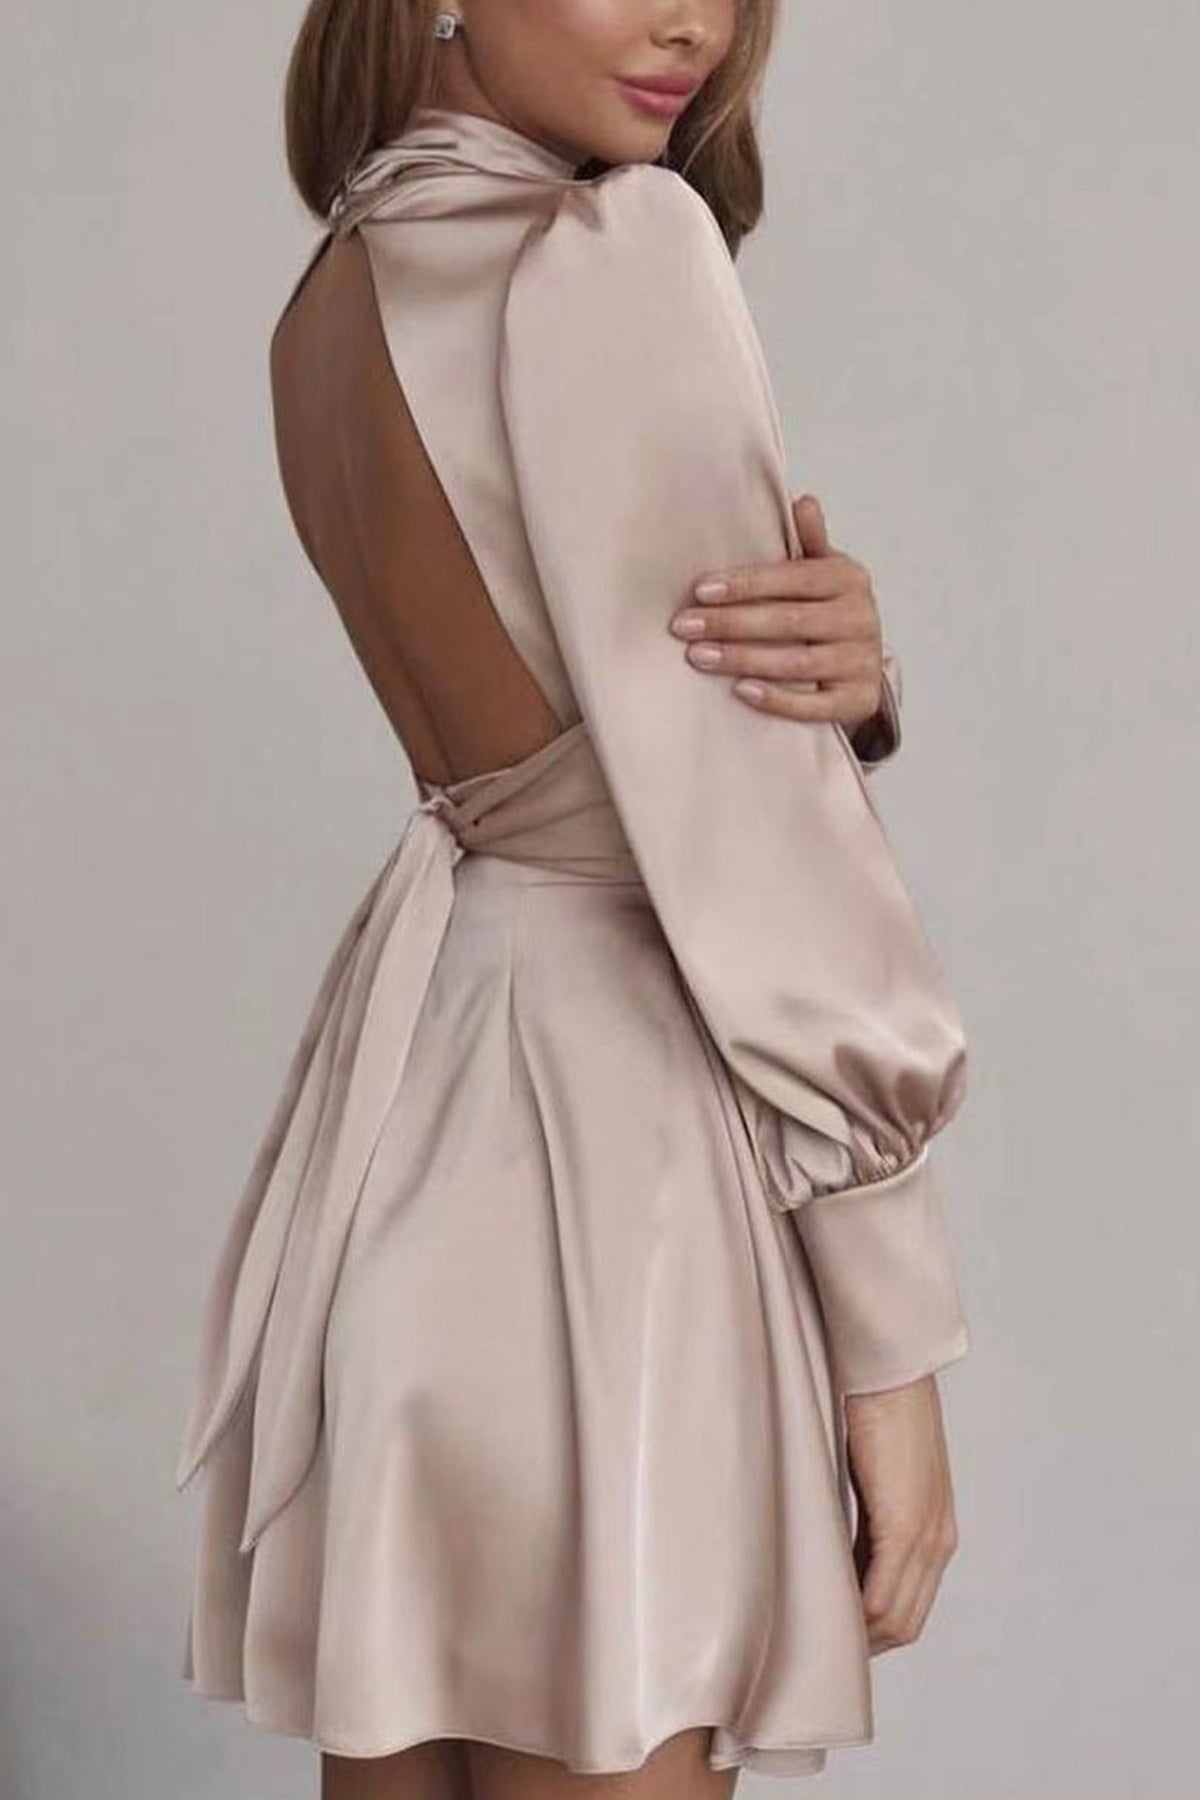 Beyprern spring outfit summer outfit dress Satin Puff Sleeve Strappy Backless Dress